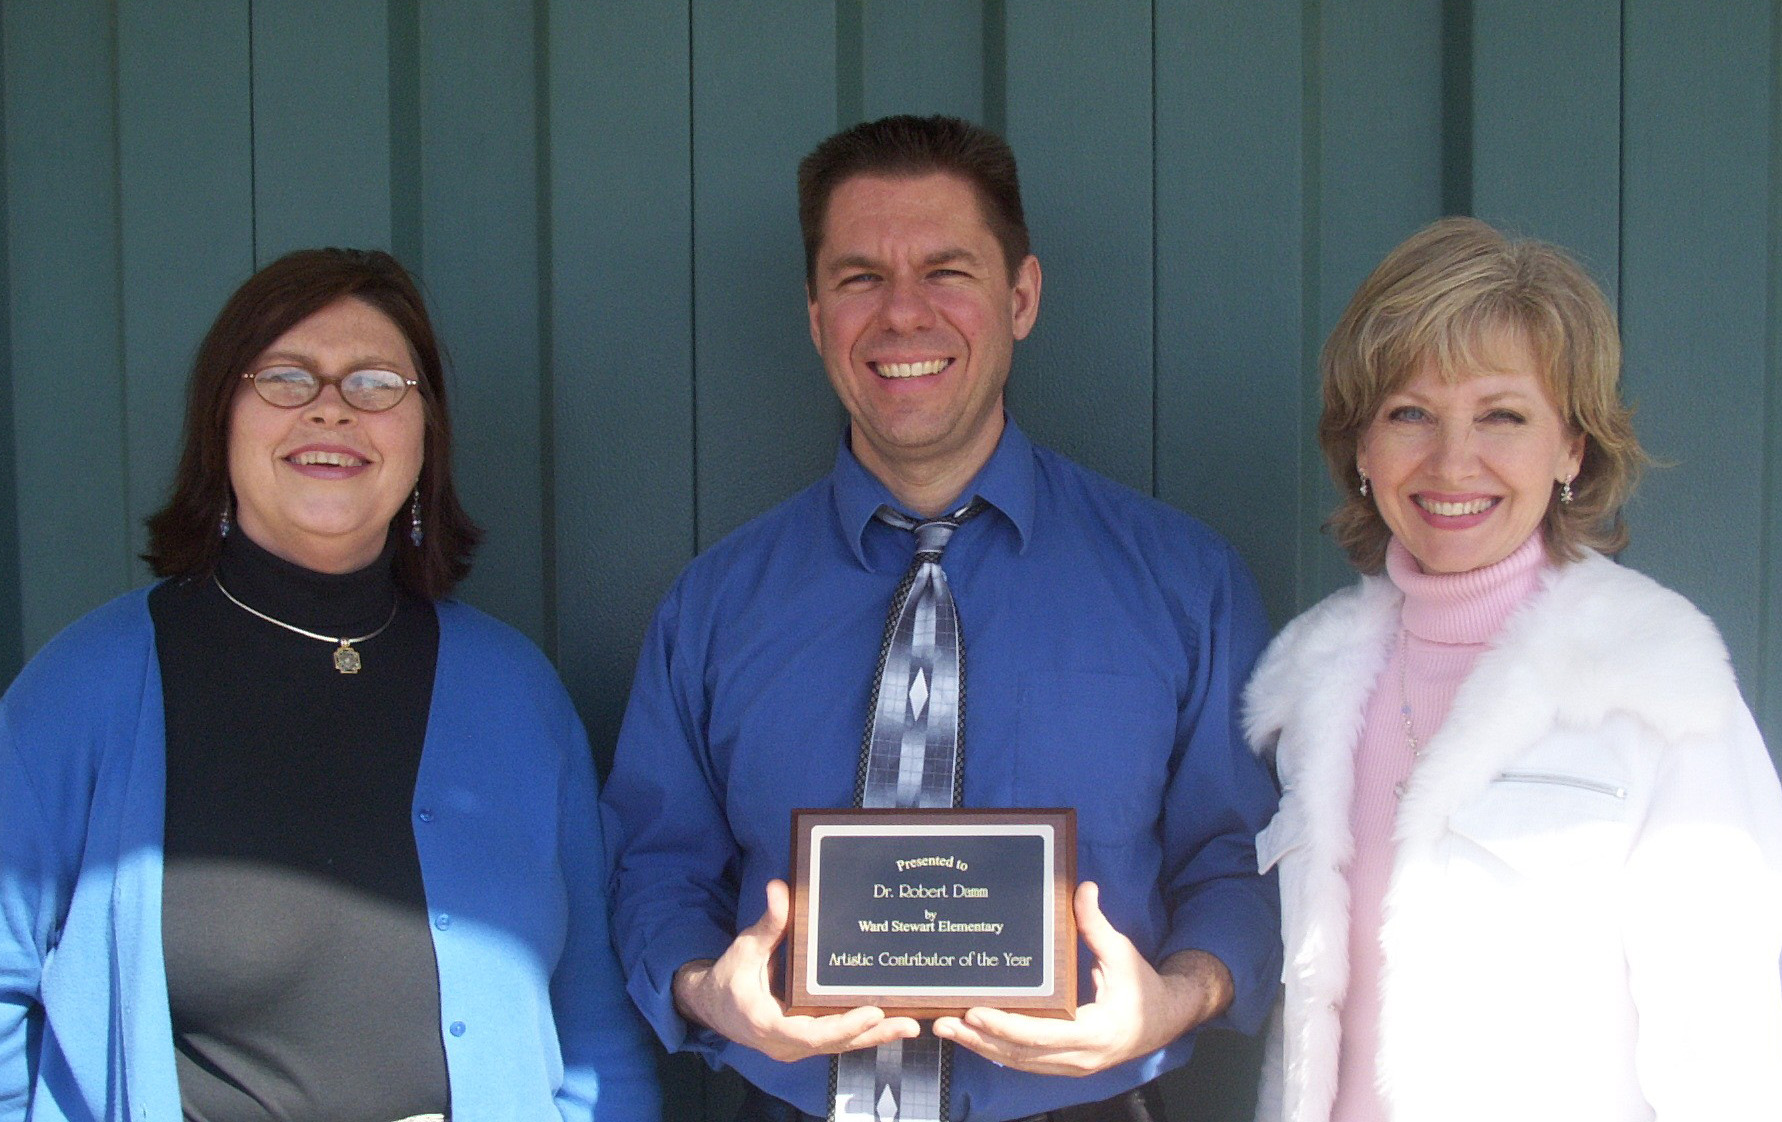 Robert J. Damm receives the Ward-Stewart Elementary School honor from assistant principal Susan Watts (l) and music teacher Cindy Melby.   